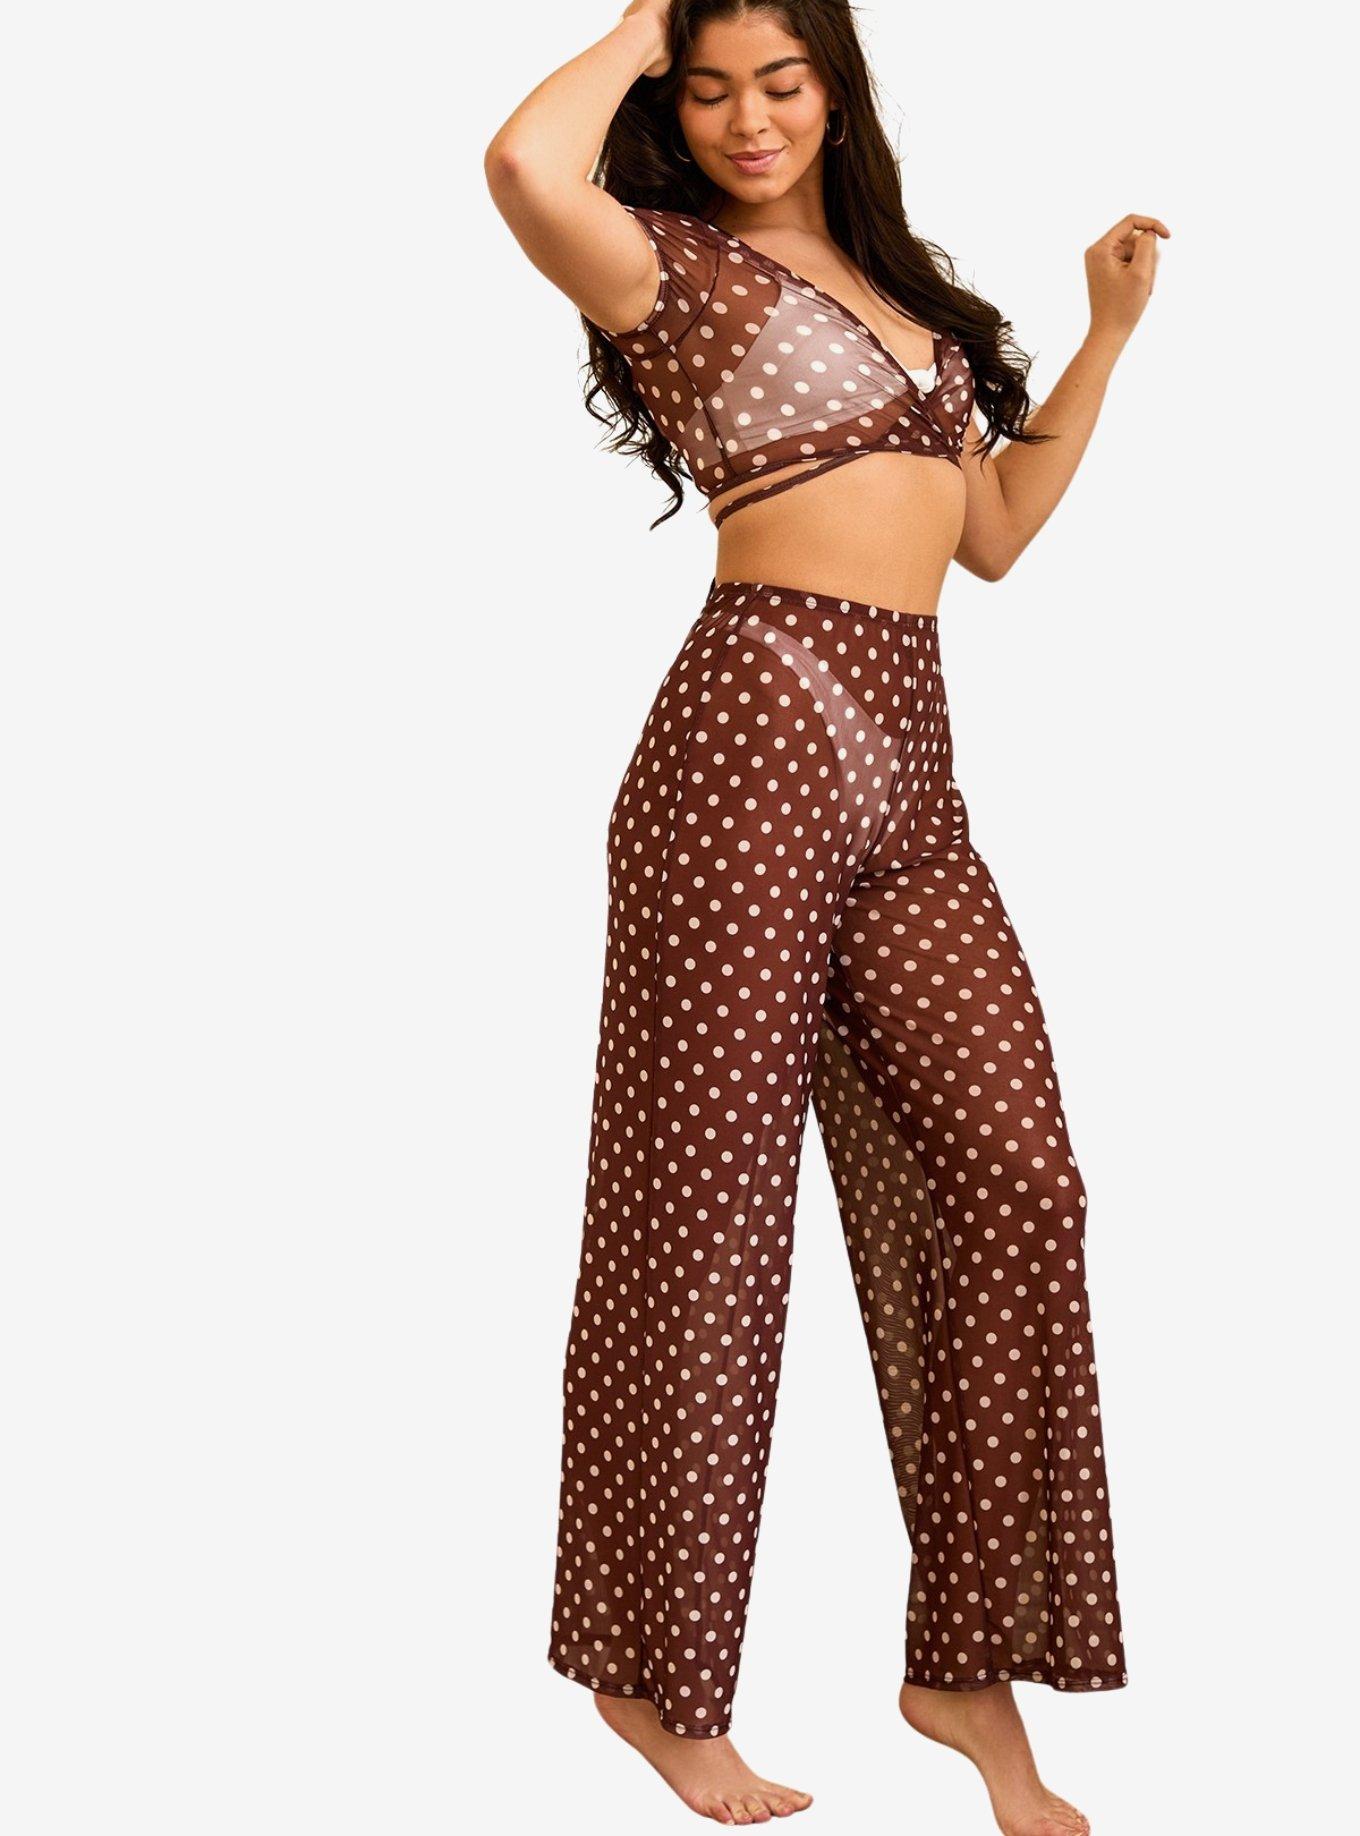 Dippin' Daisy's That Girl Swim Cover-Up Pants Dotted Brown, BROWN, hi-res